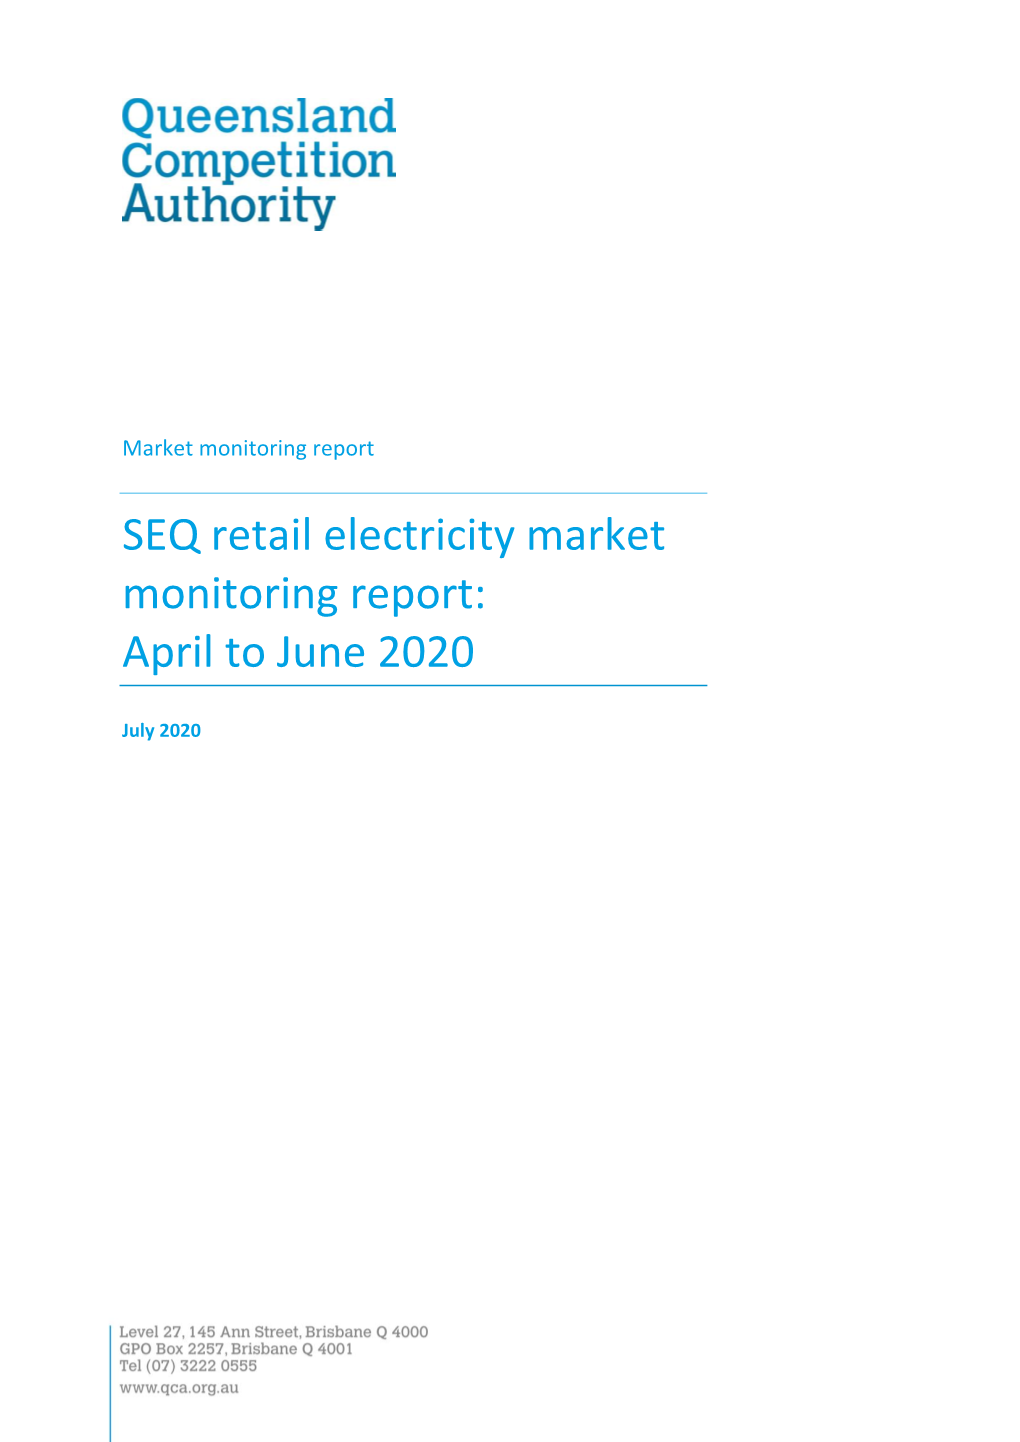 SEQ Retail Electricity Market Monitoring Report: April to June 2020